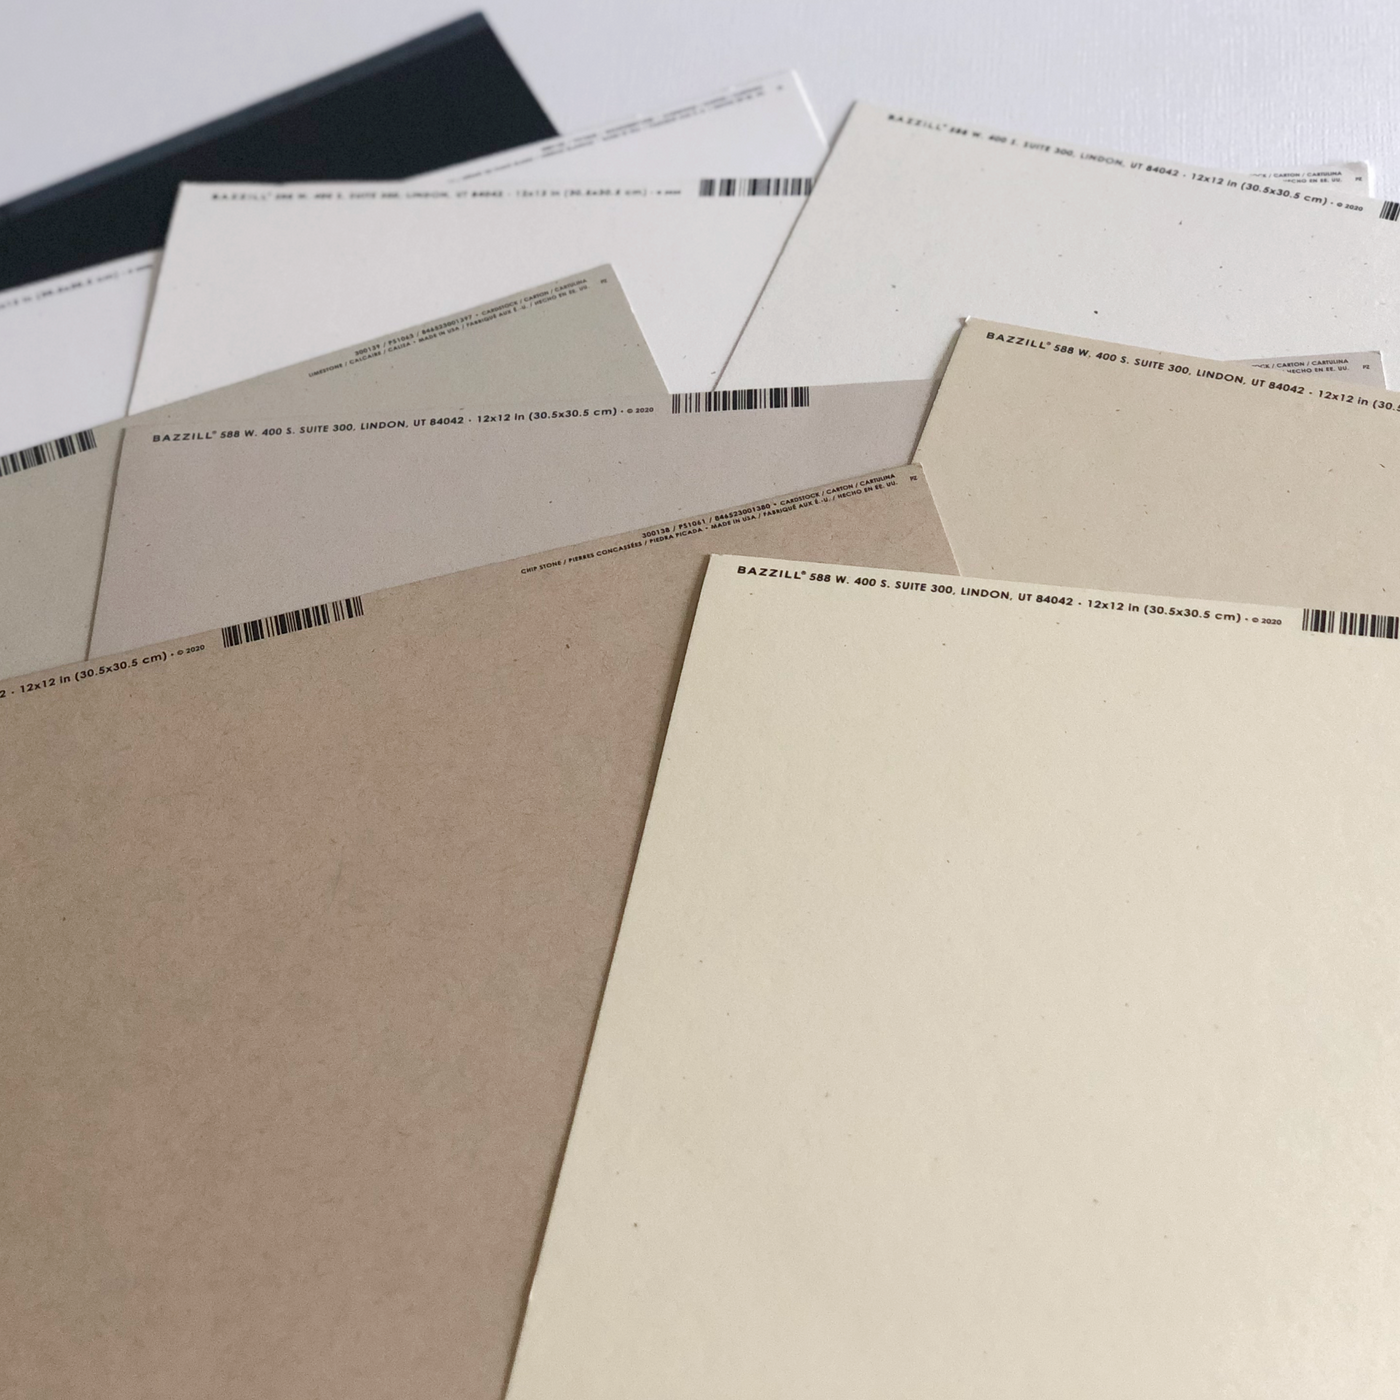 All nine colors of 12x12 cardstock sheets from Bazzill Speckles collection